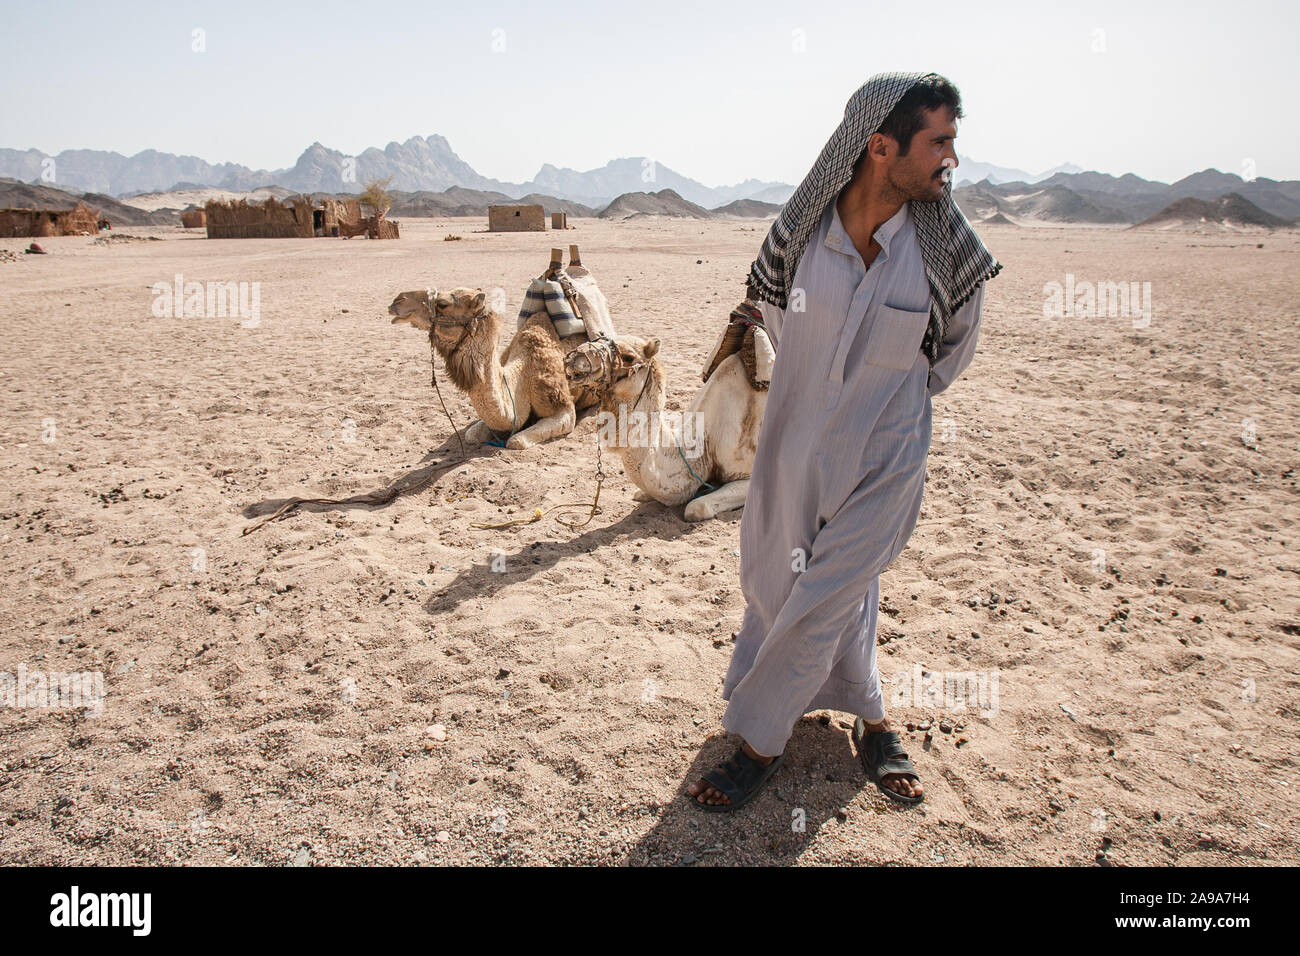 Hurghada, Egypt, April 27, 2008: A Bedouin and his camels in a Bedouin village in the desert near Hurghada. Stock Photo